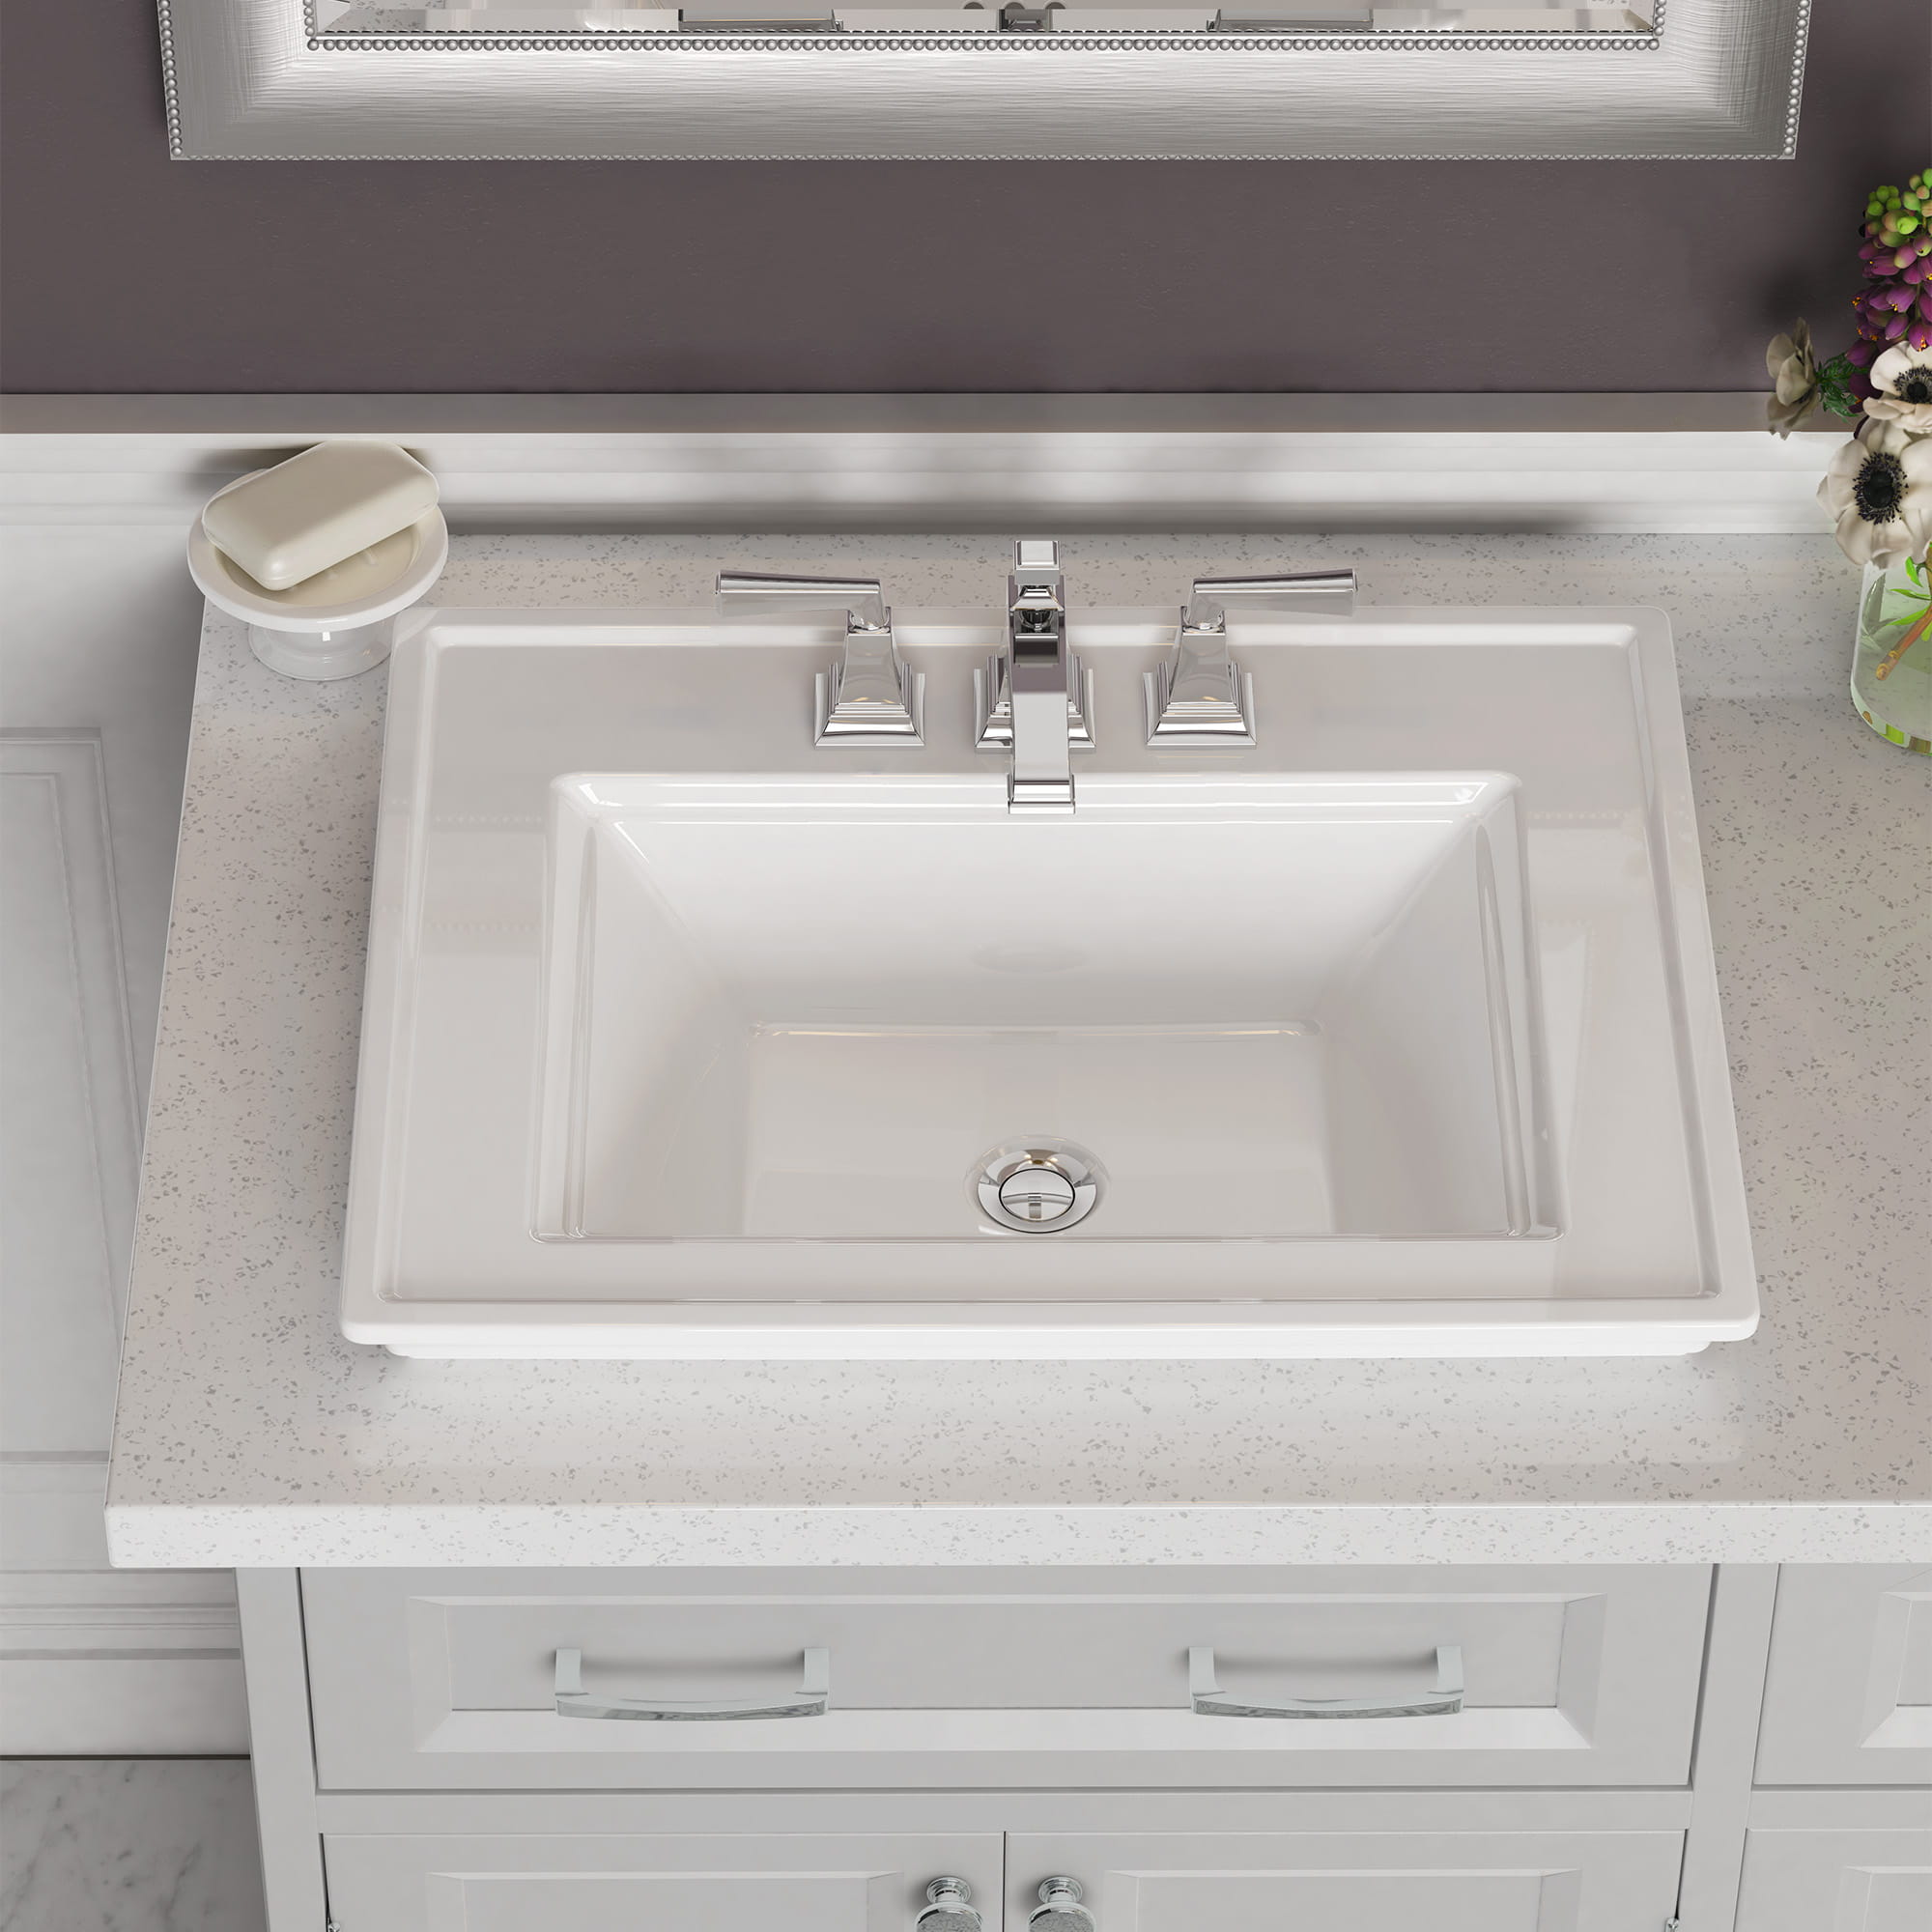 Town Square® S Drop-In Sink With 4-Inch Centerset